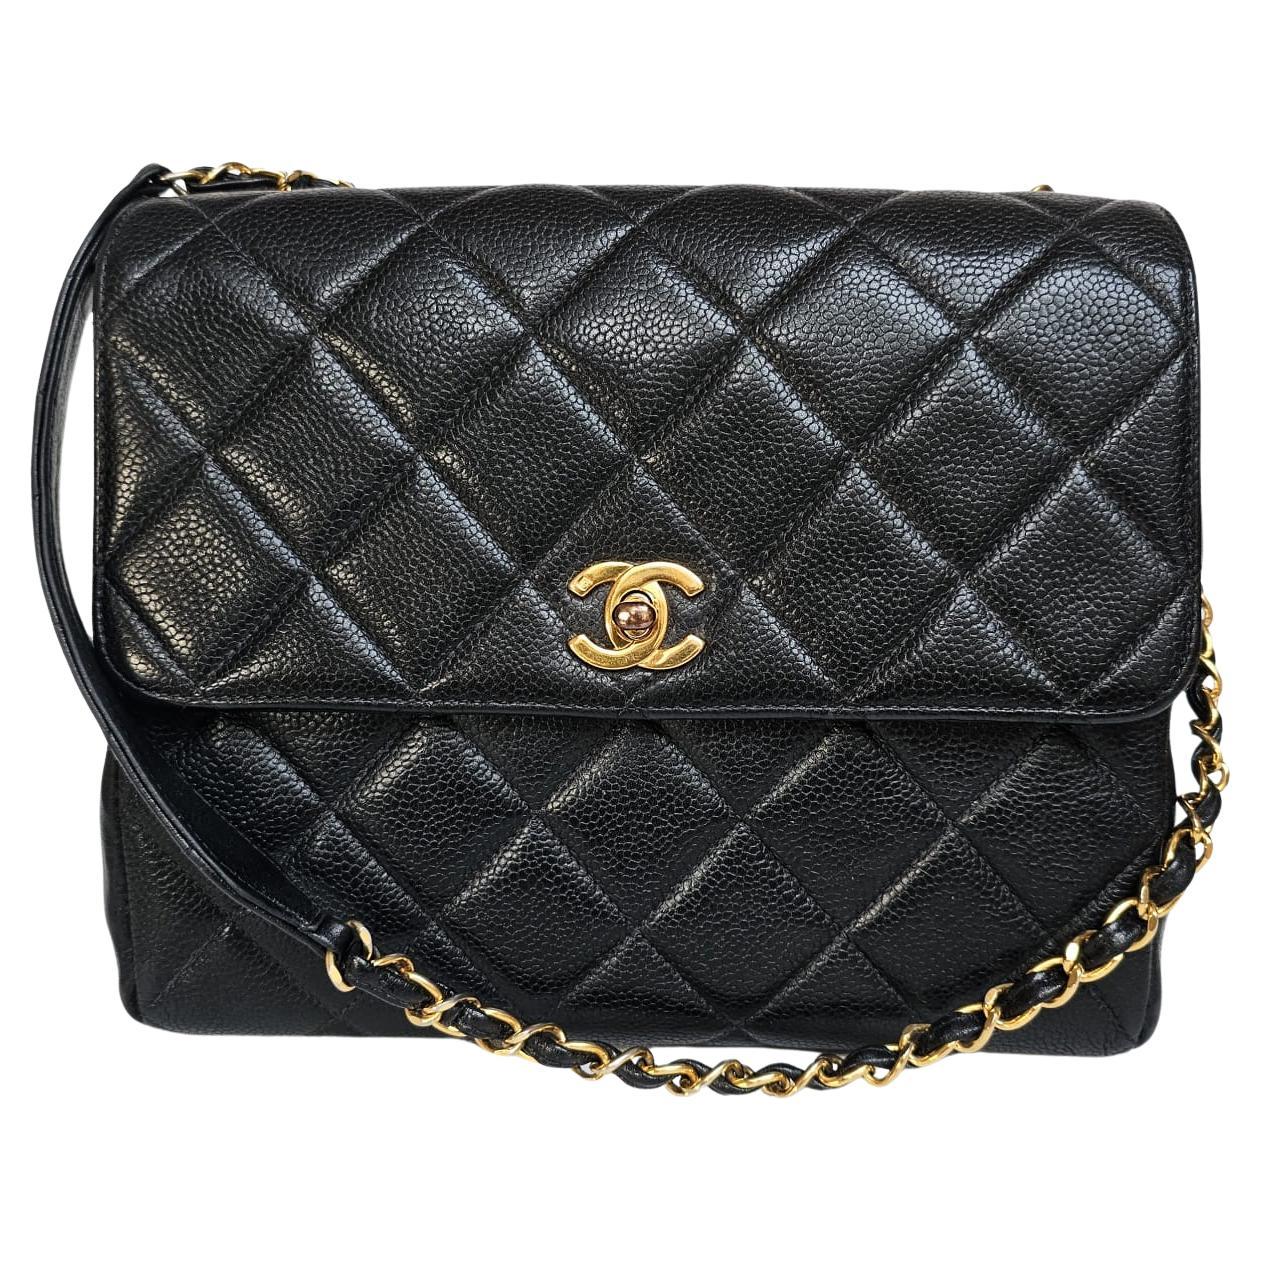 Vintage Chanel Black Caviar Quilted Square Flap Bag